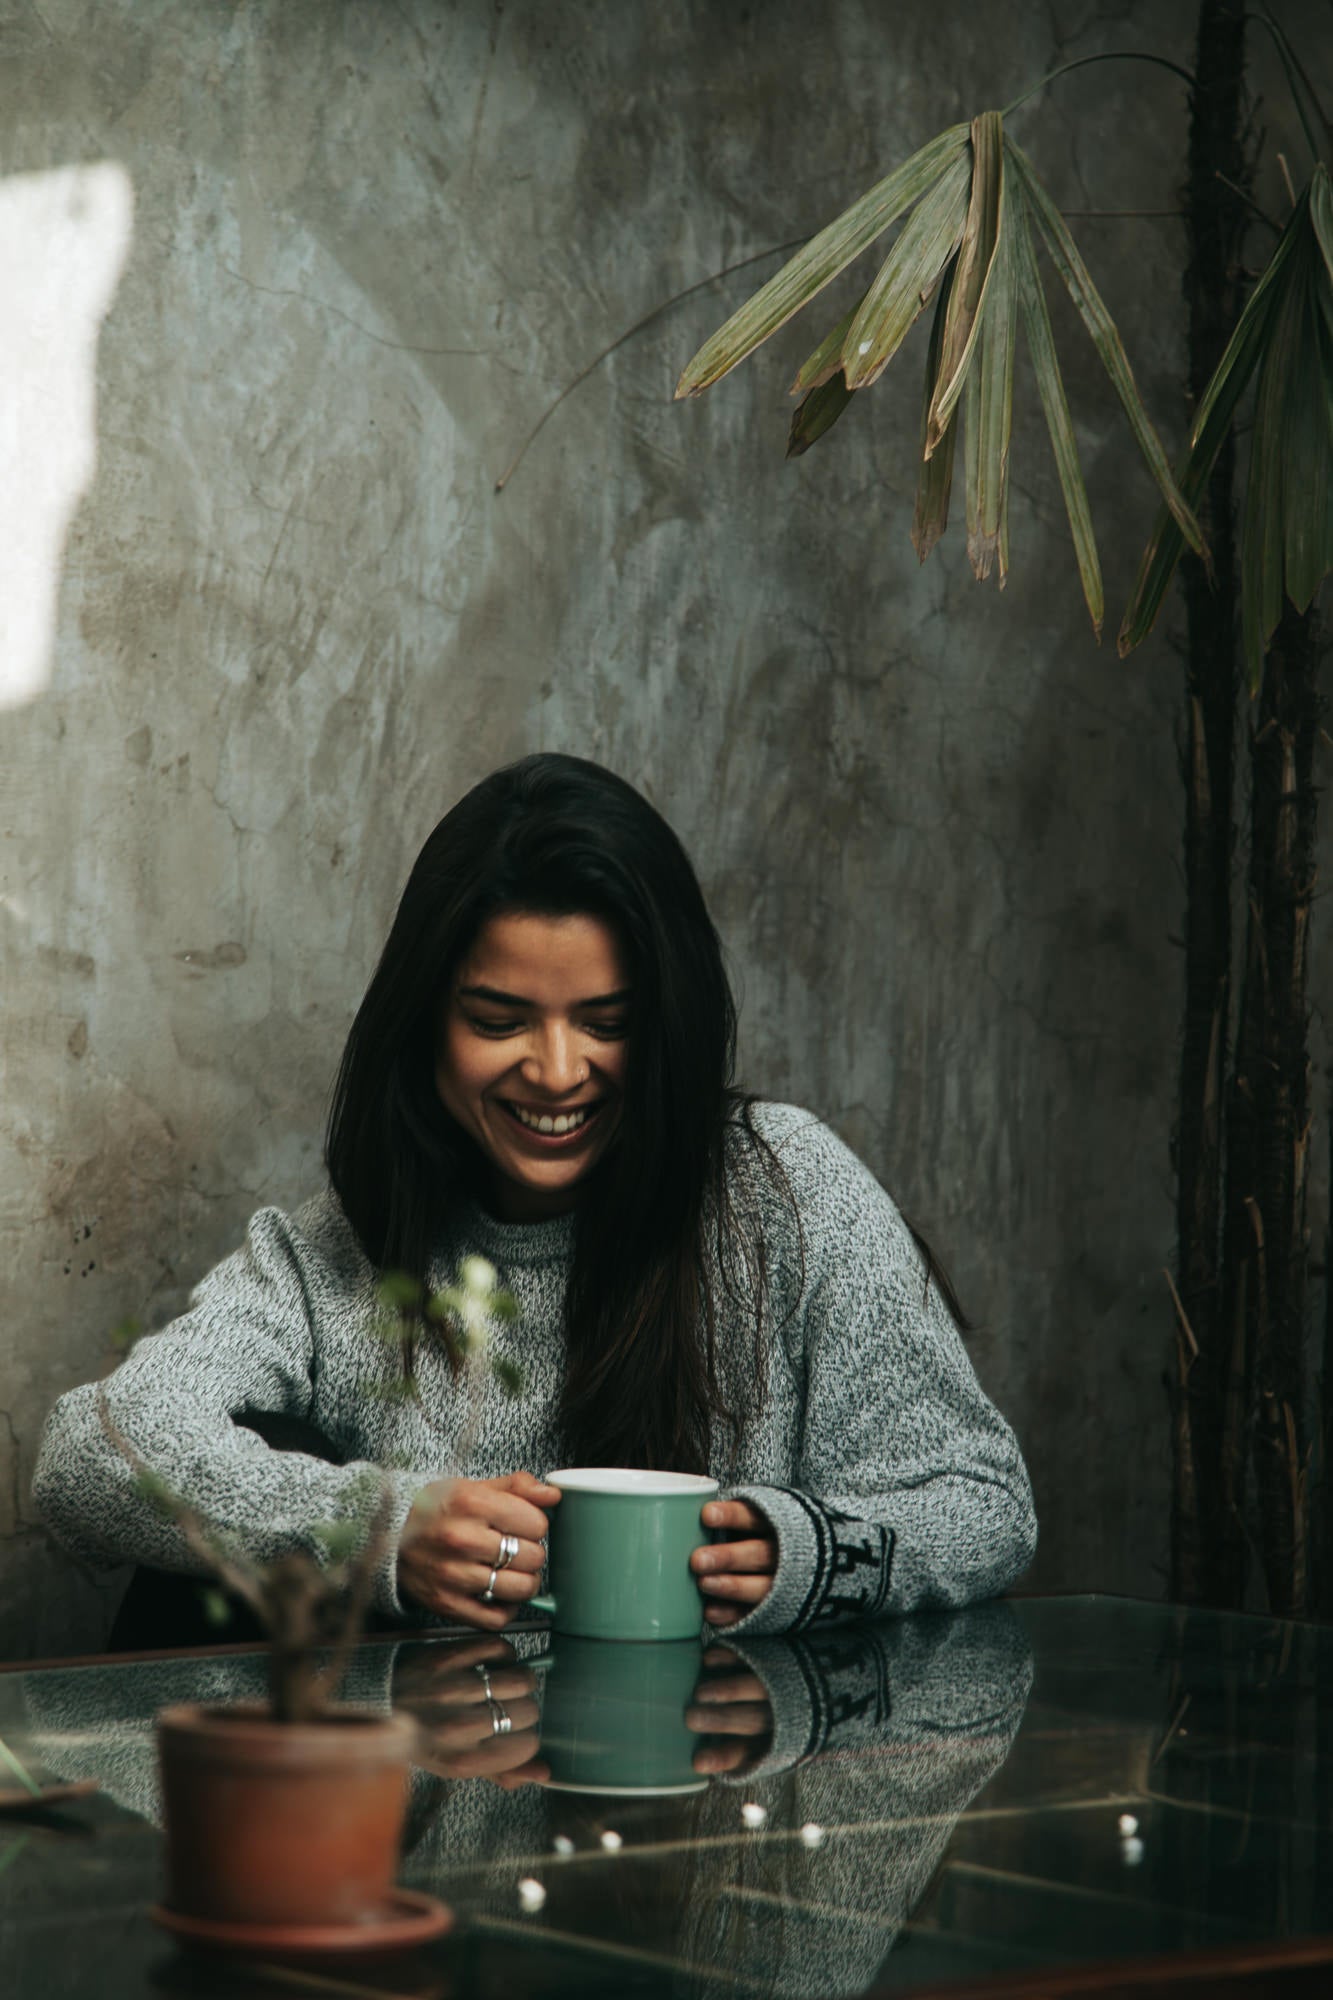 Model laughing and drinking coffee wearing the Costa alpaca sweater by Paka Apparel